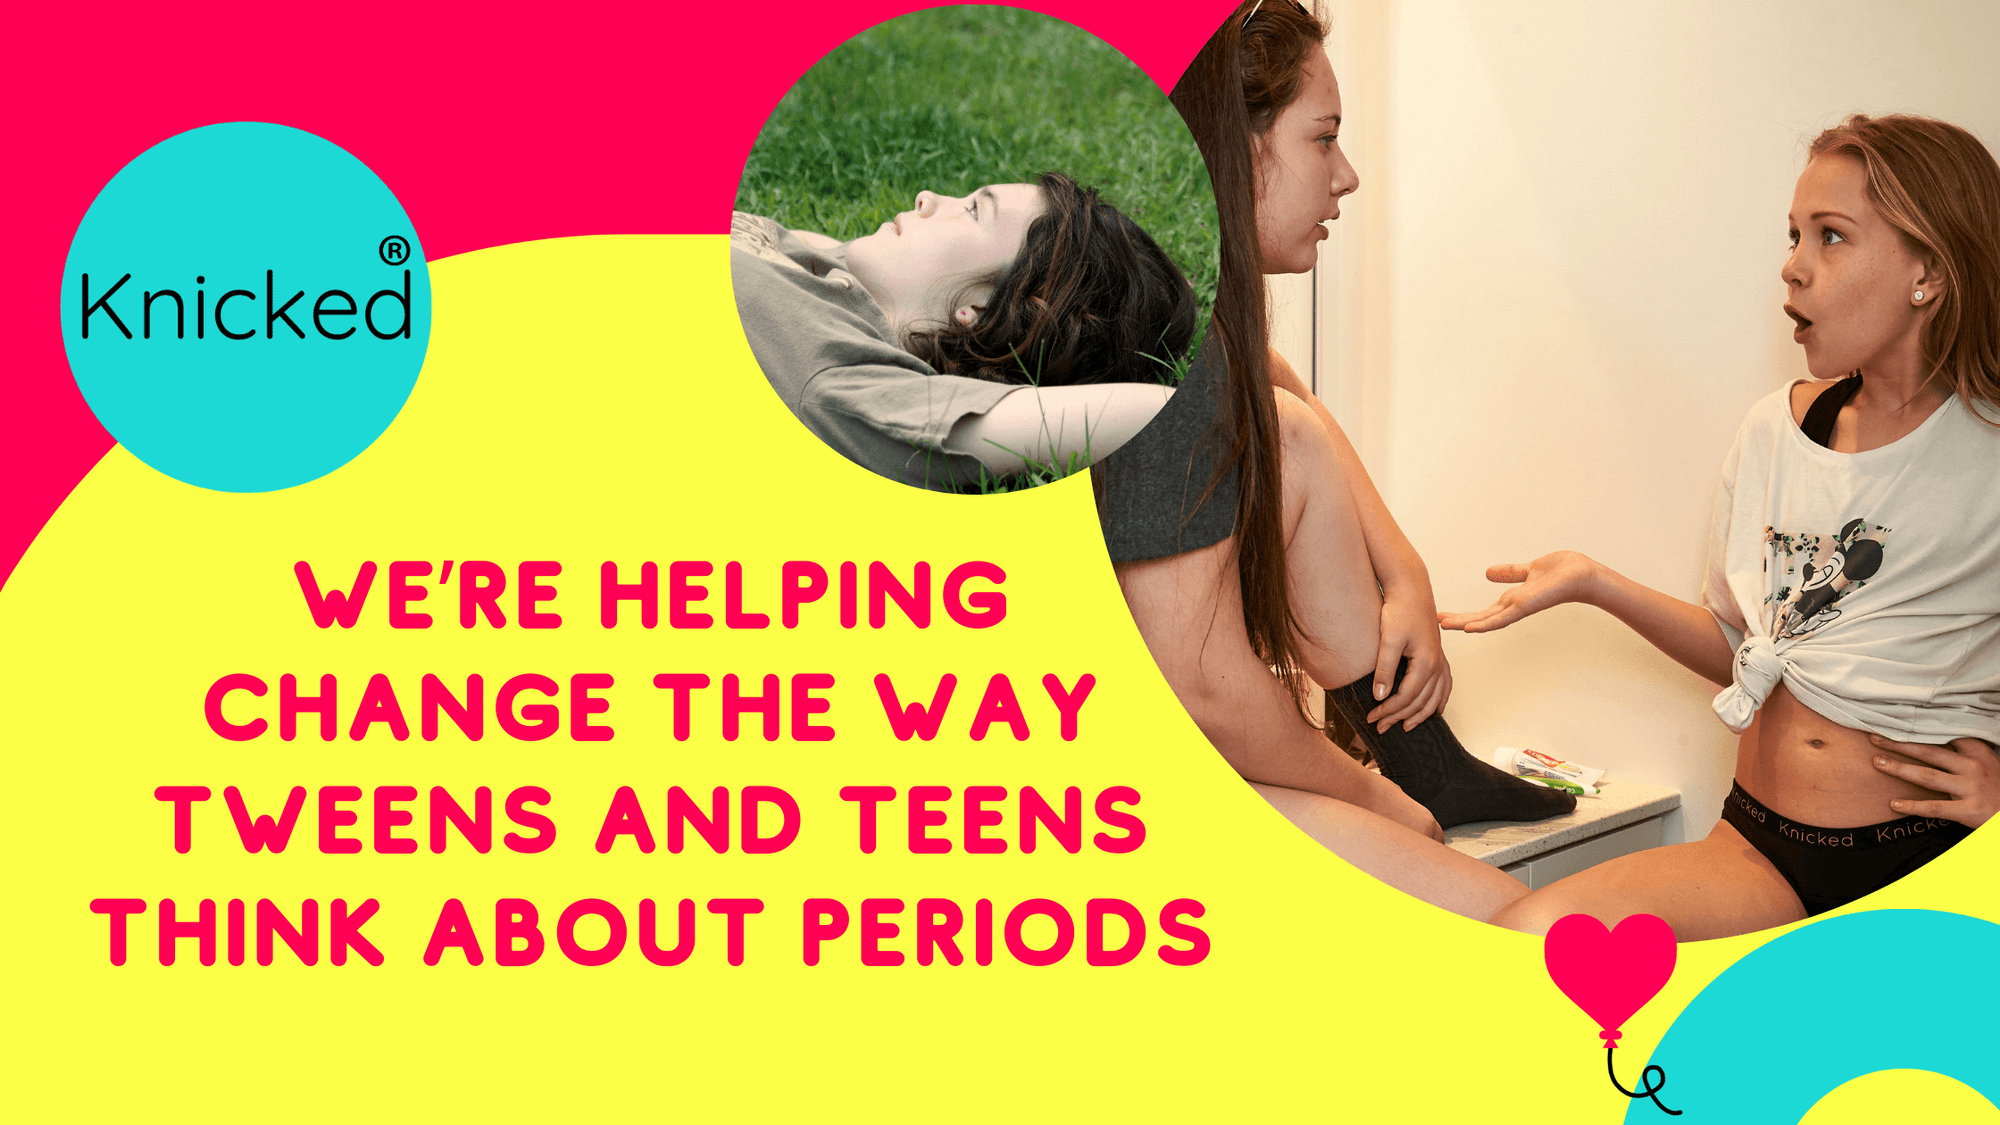 Changing the way tweens and teens think about periods!